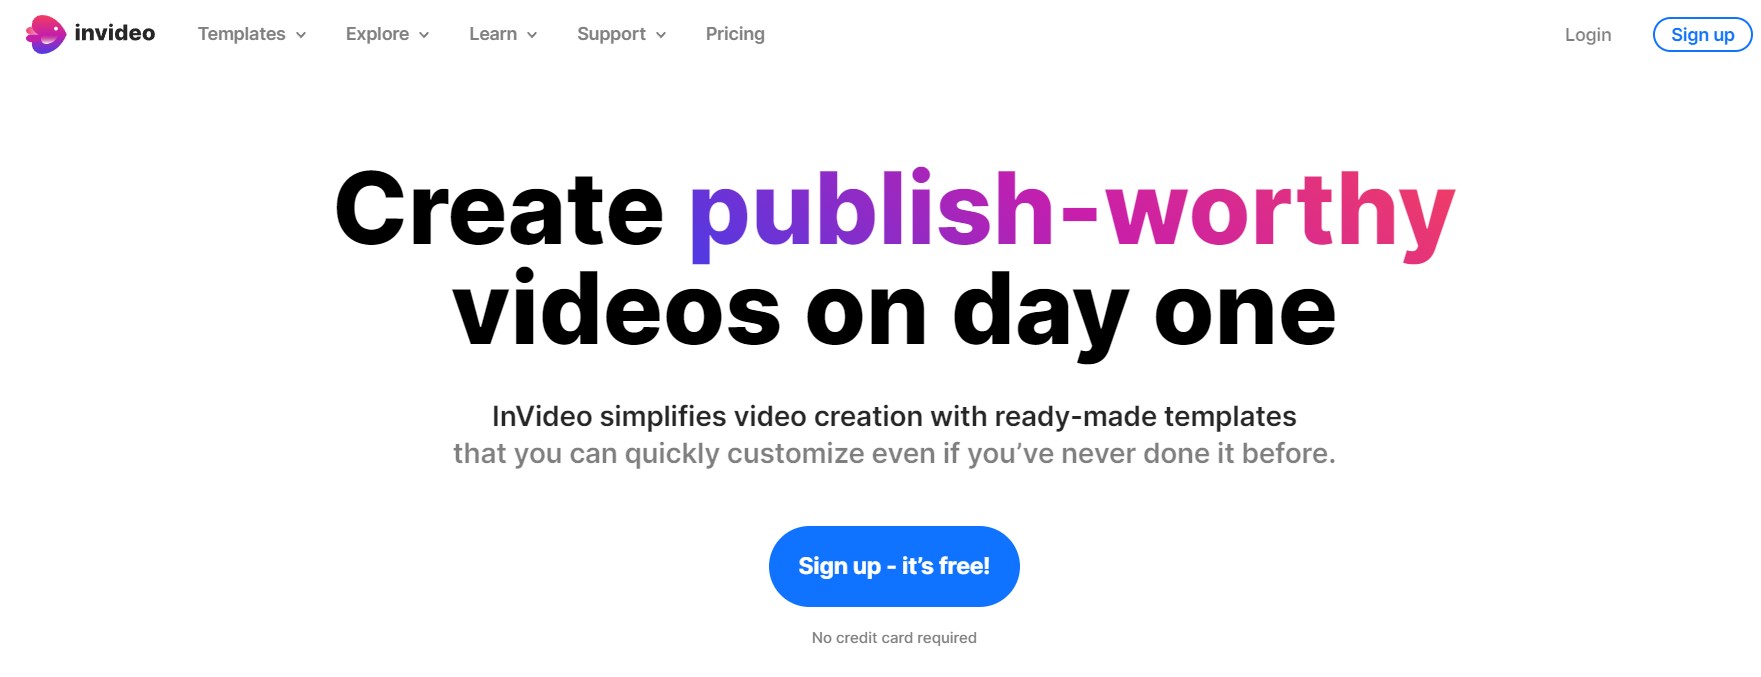 Invideo an online video editing tool for bloggers